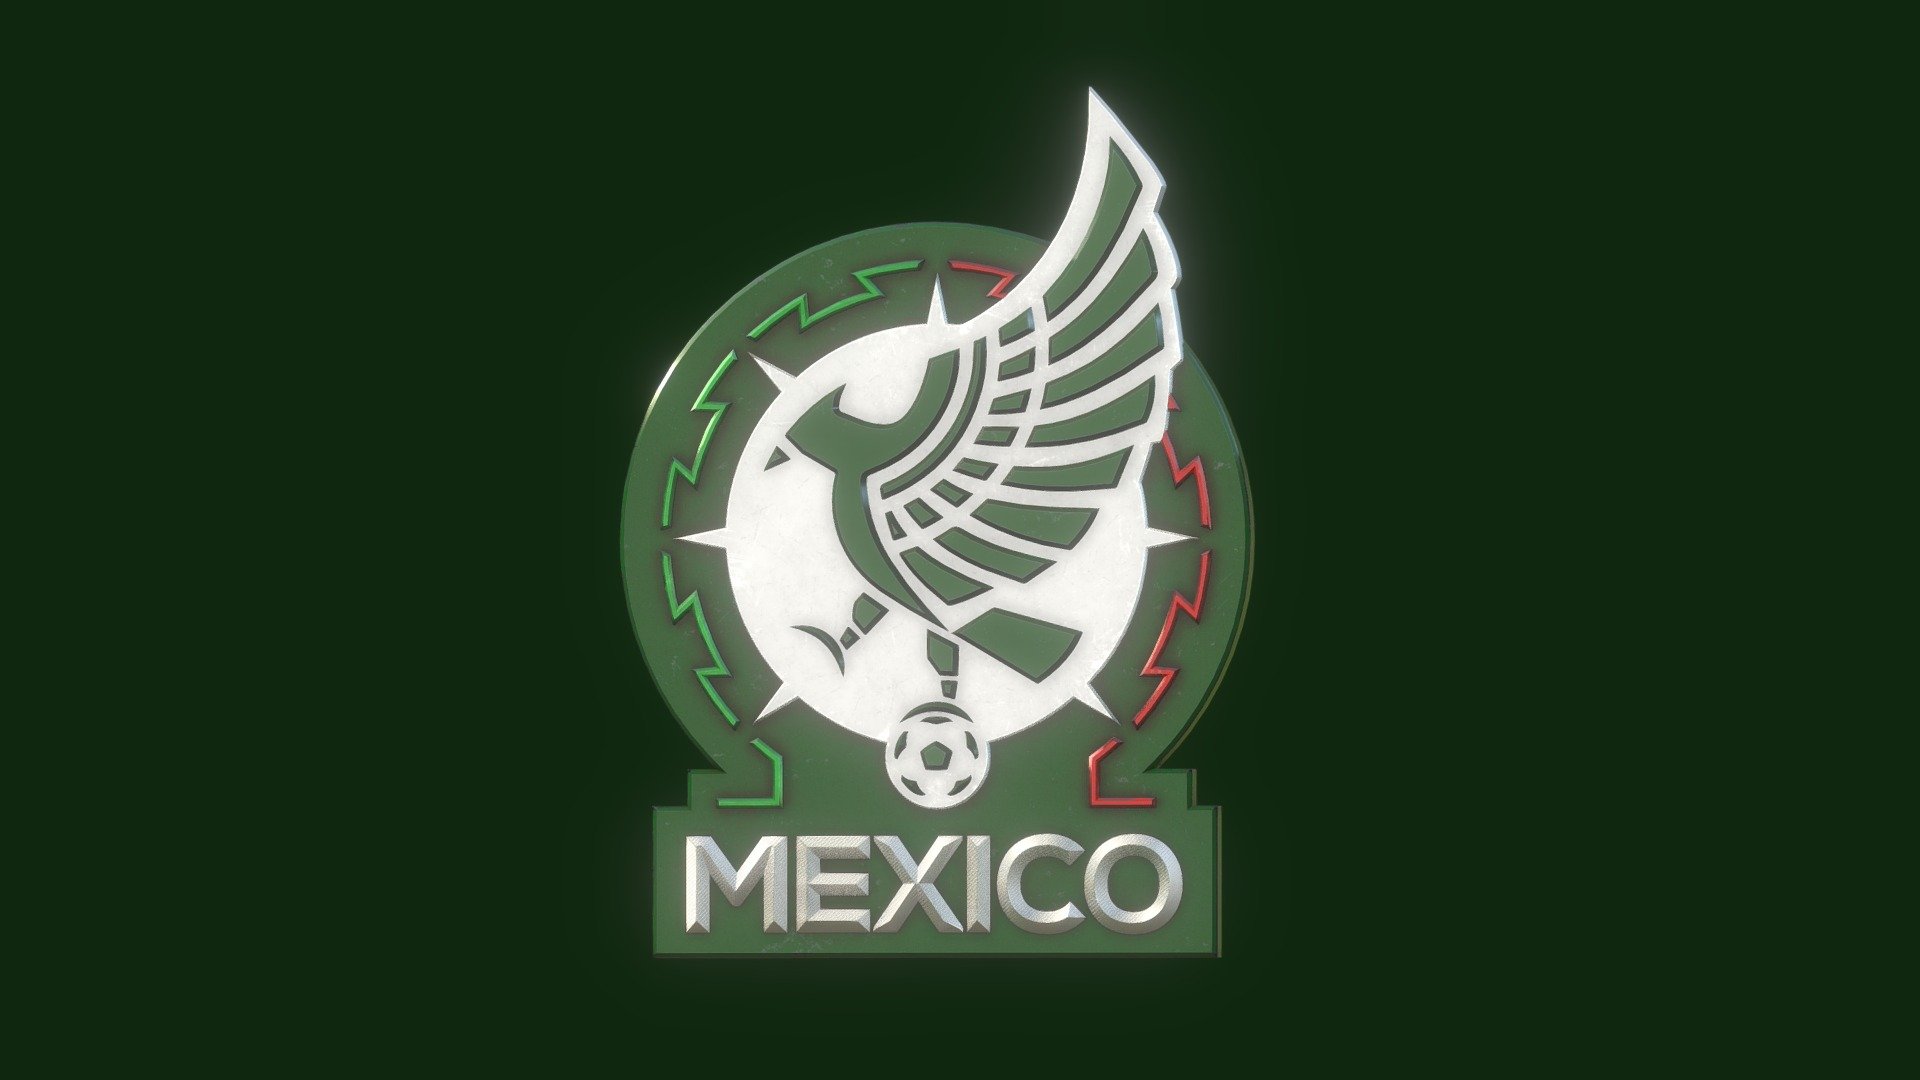 3D stylized badge of Mexico national football team, one of the teams qualified for the FIFA World Cup 2022.

This event it’s scheduled to take place in Qatar from 21 November to 18 December 2022

Made with Blender and Substance Painter 3d model